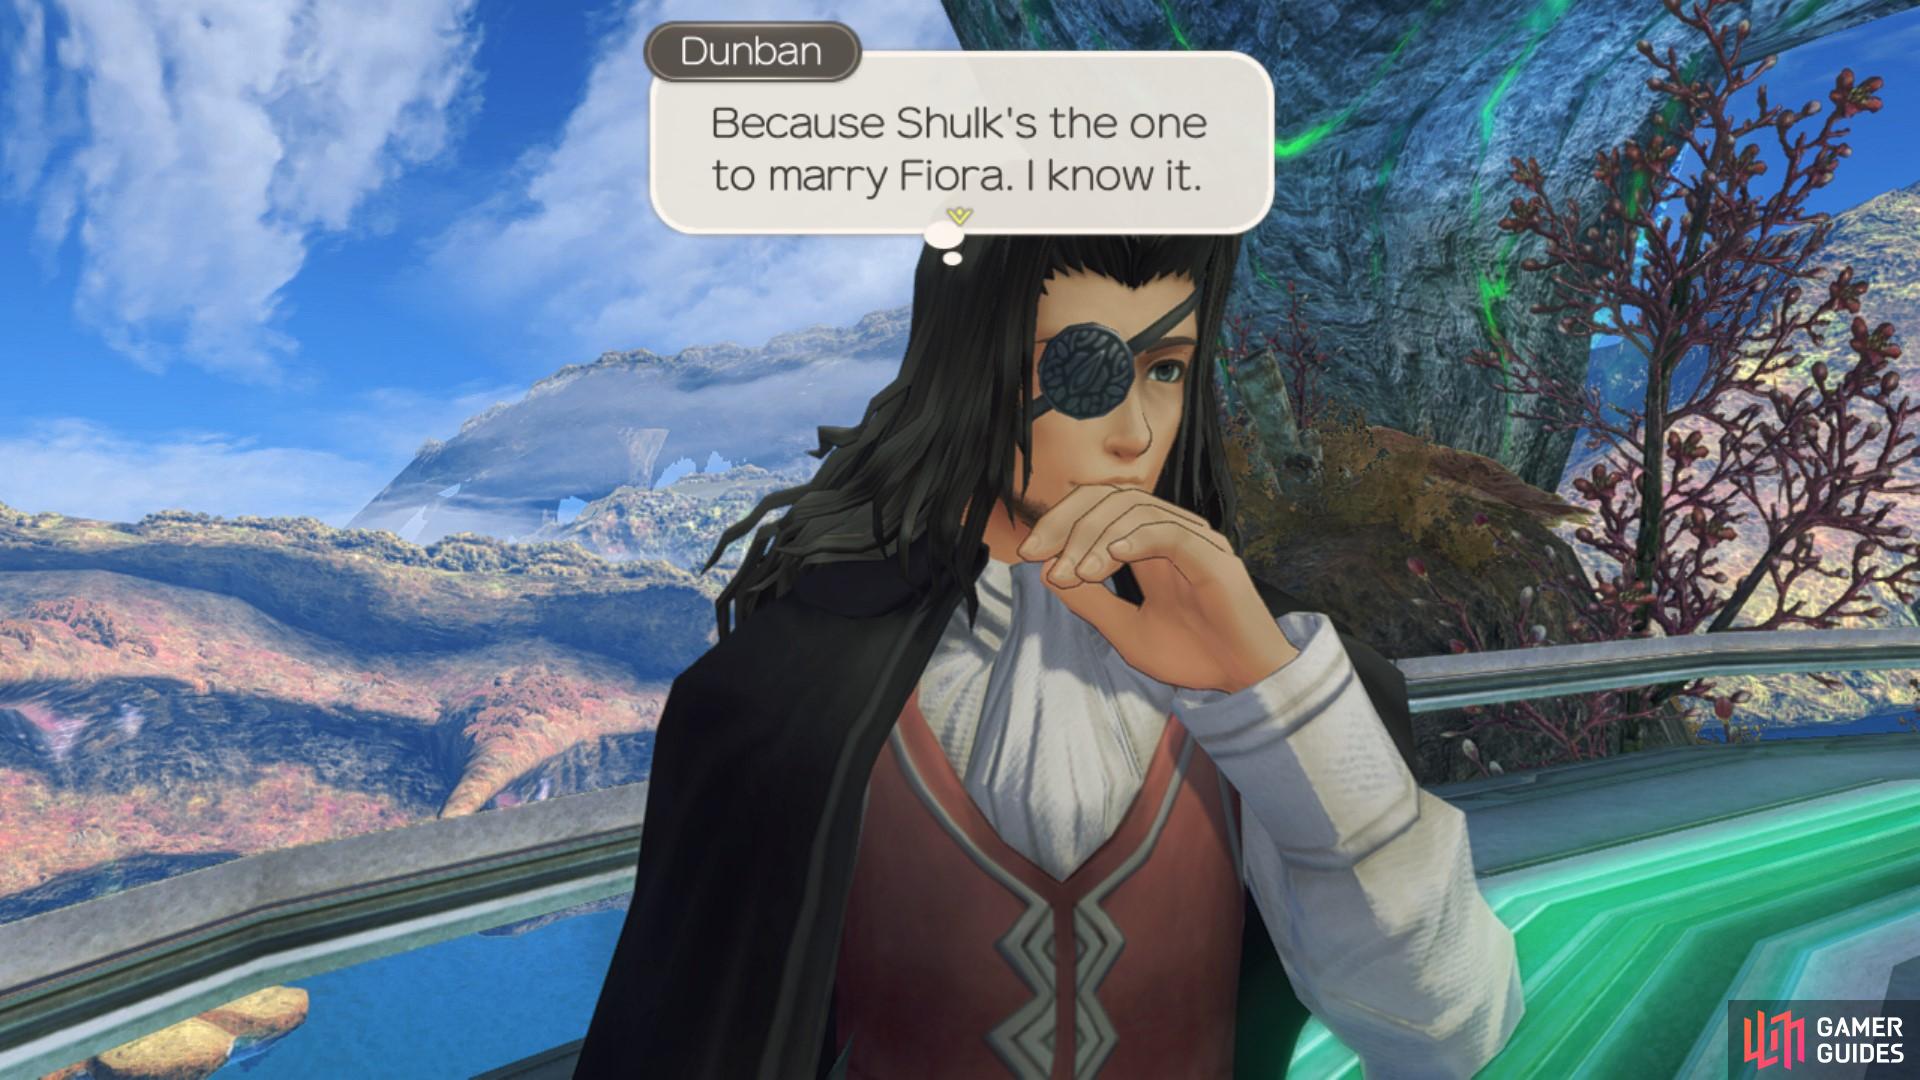 Dunban believes that Fiora and Shulk will go the distance.